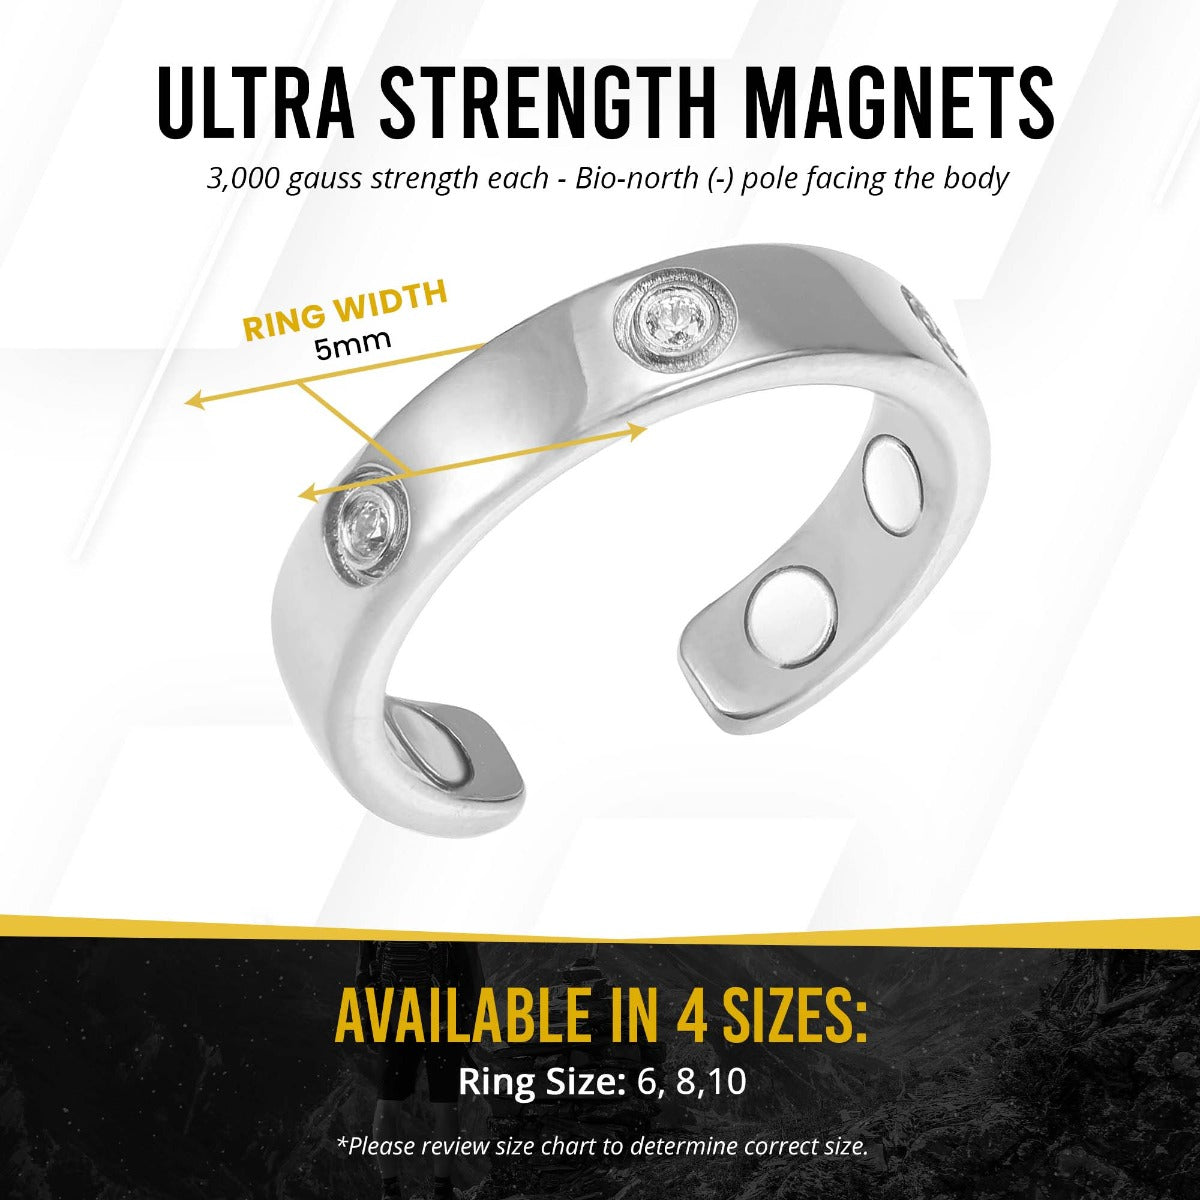 Magnetic Ring Crystal Magnetic Therapy Ring (Silver) MagnetRX